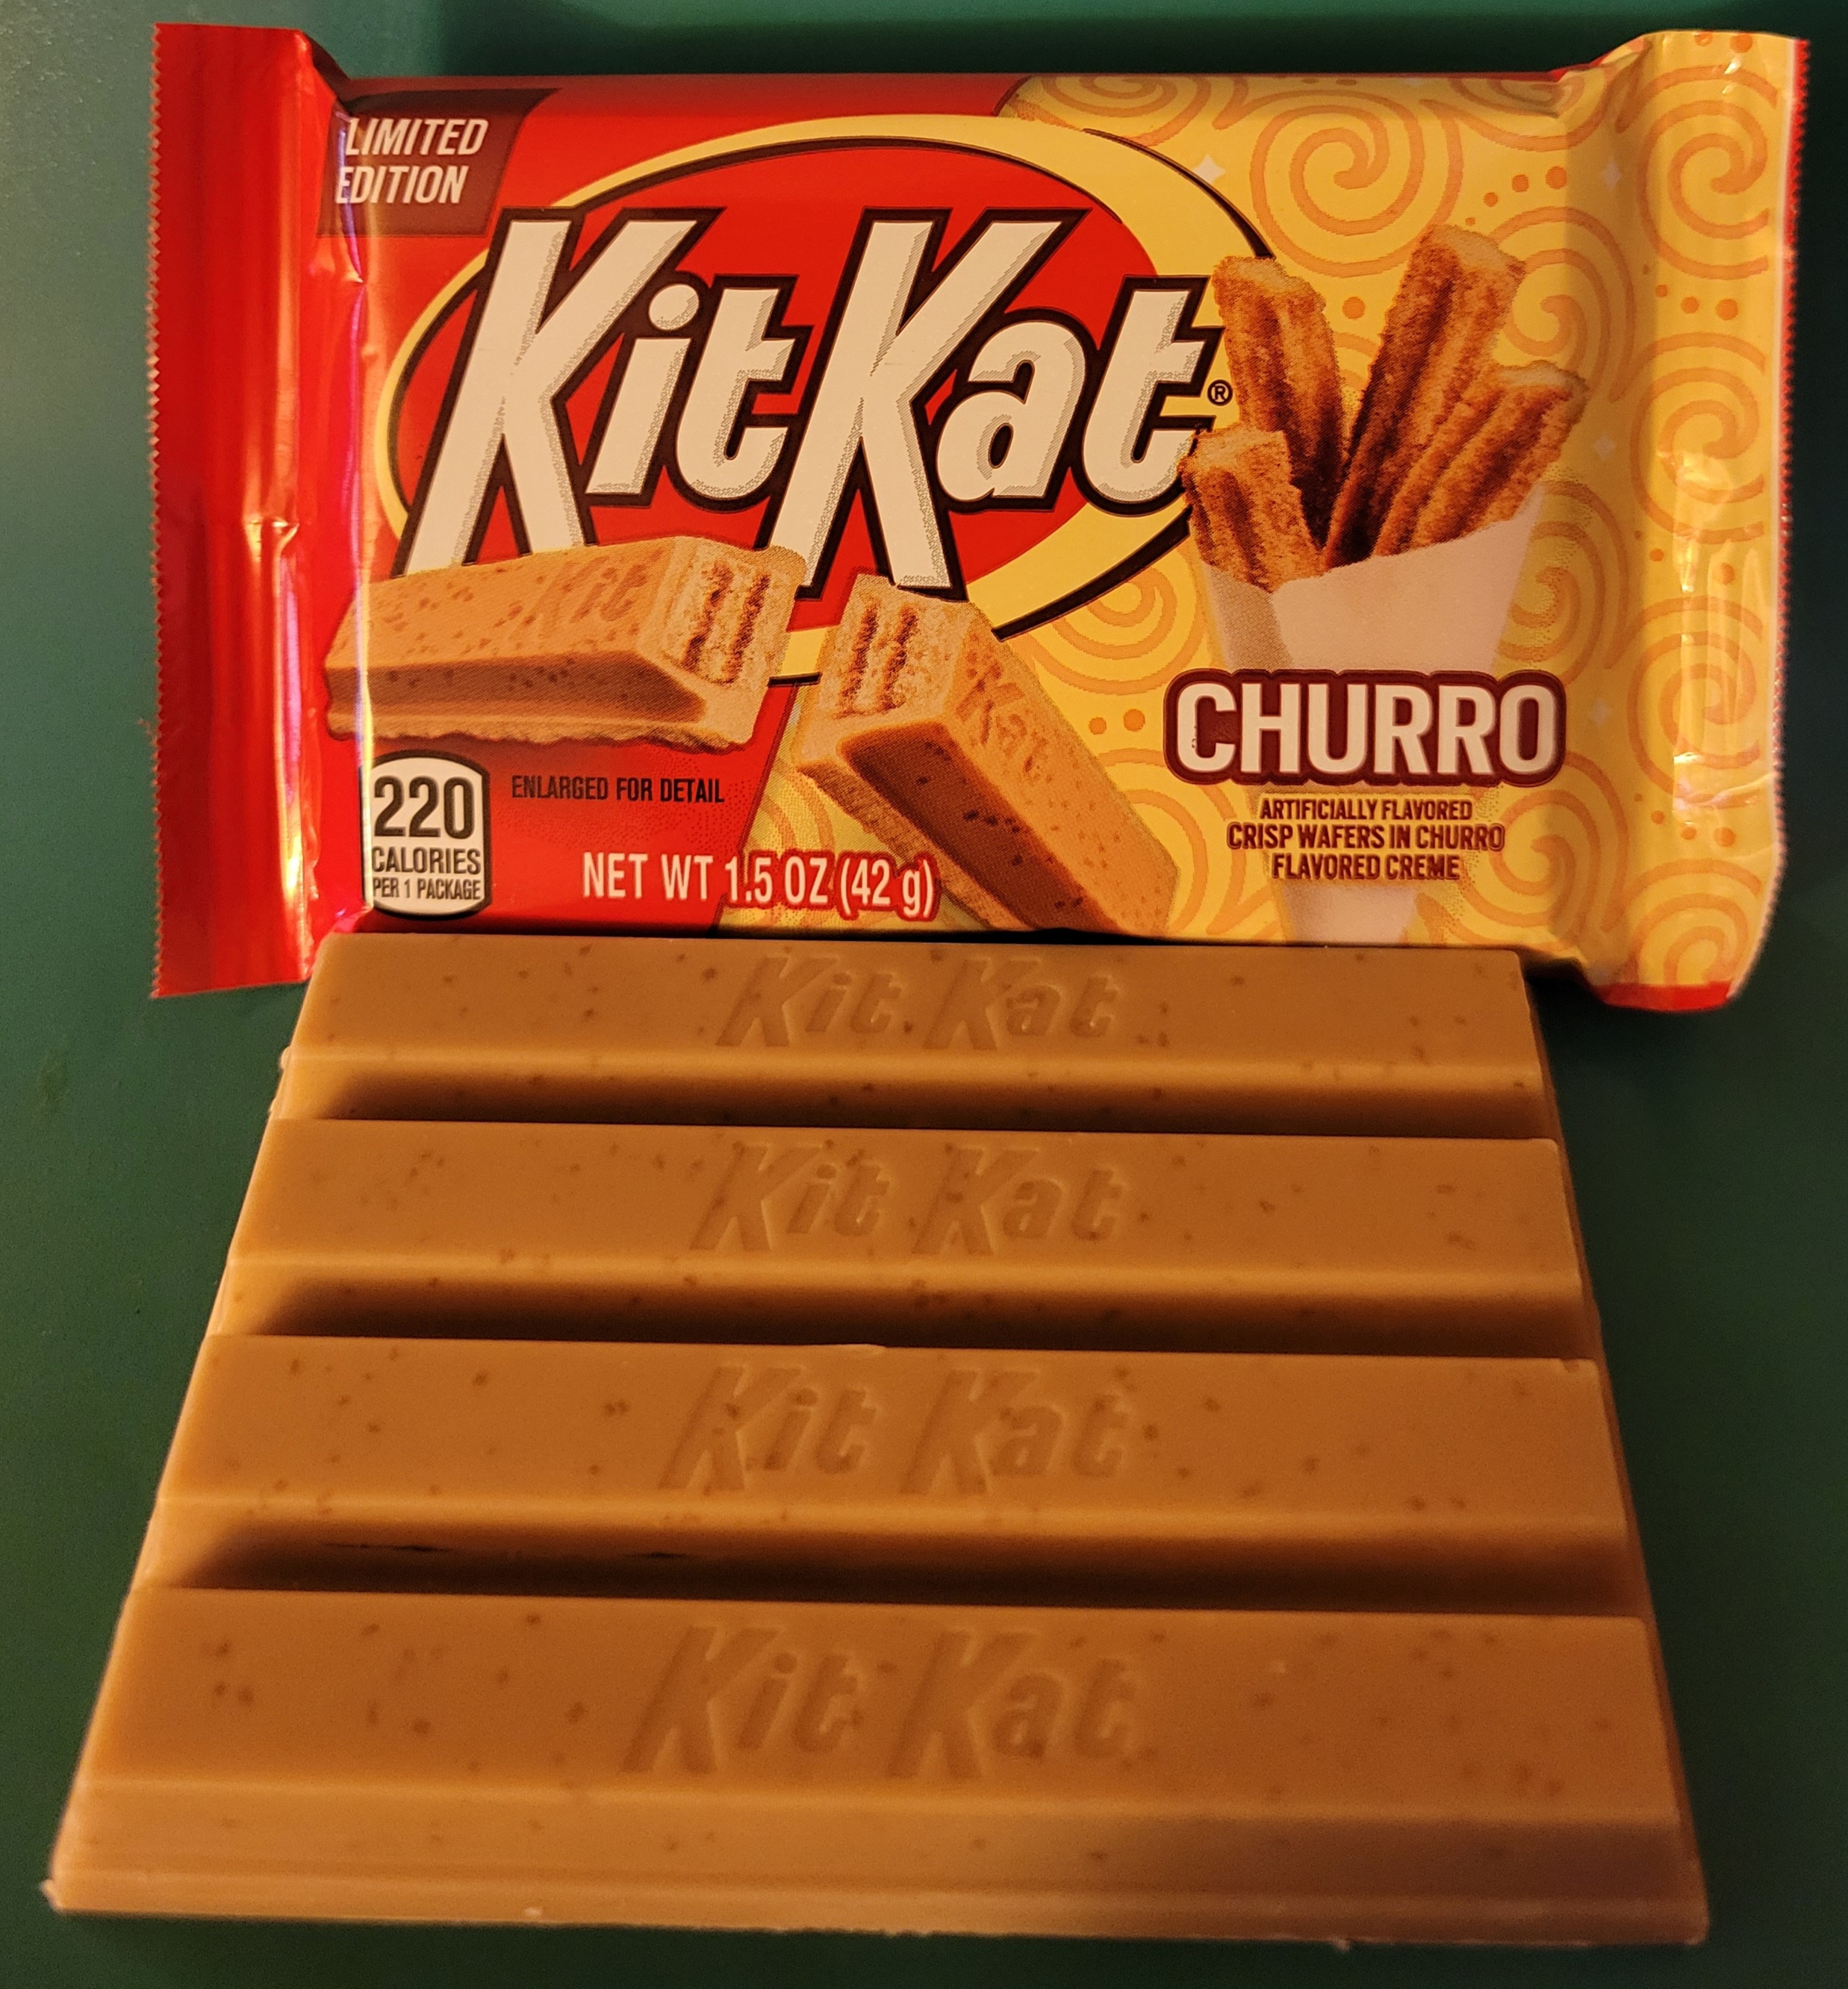 We Tried Kit Kat Churro, And It's Everything You Dreamed Of